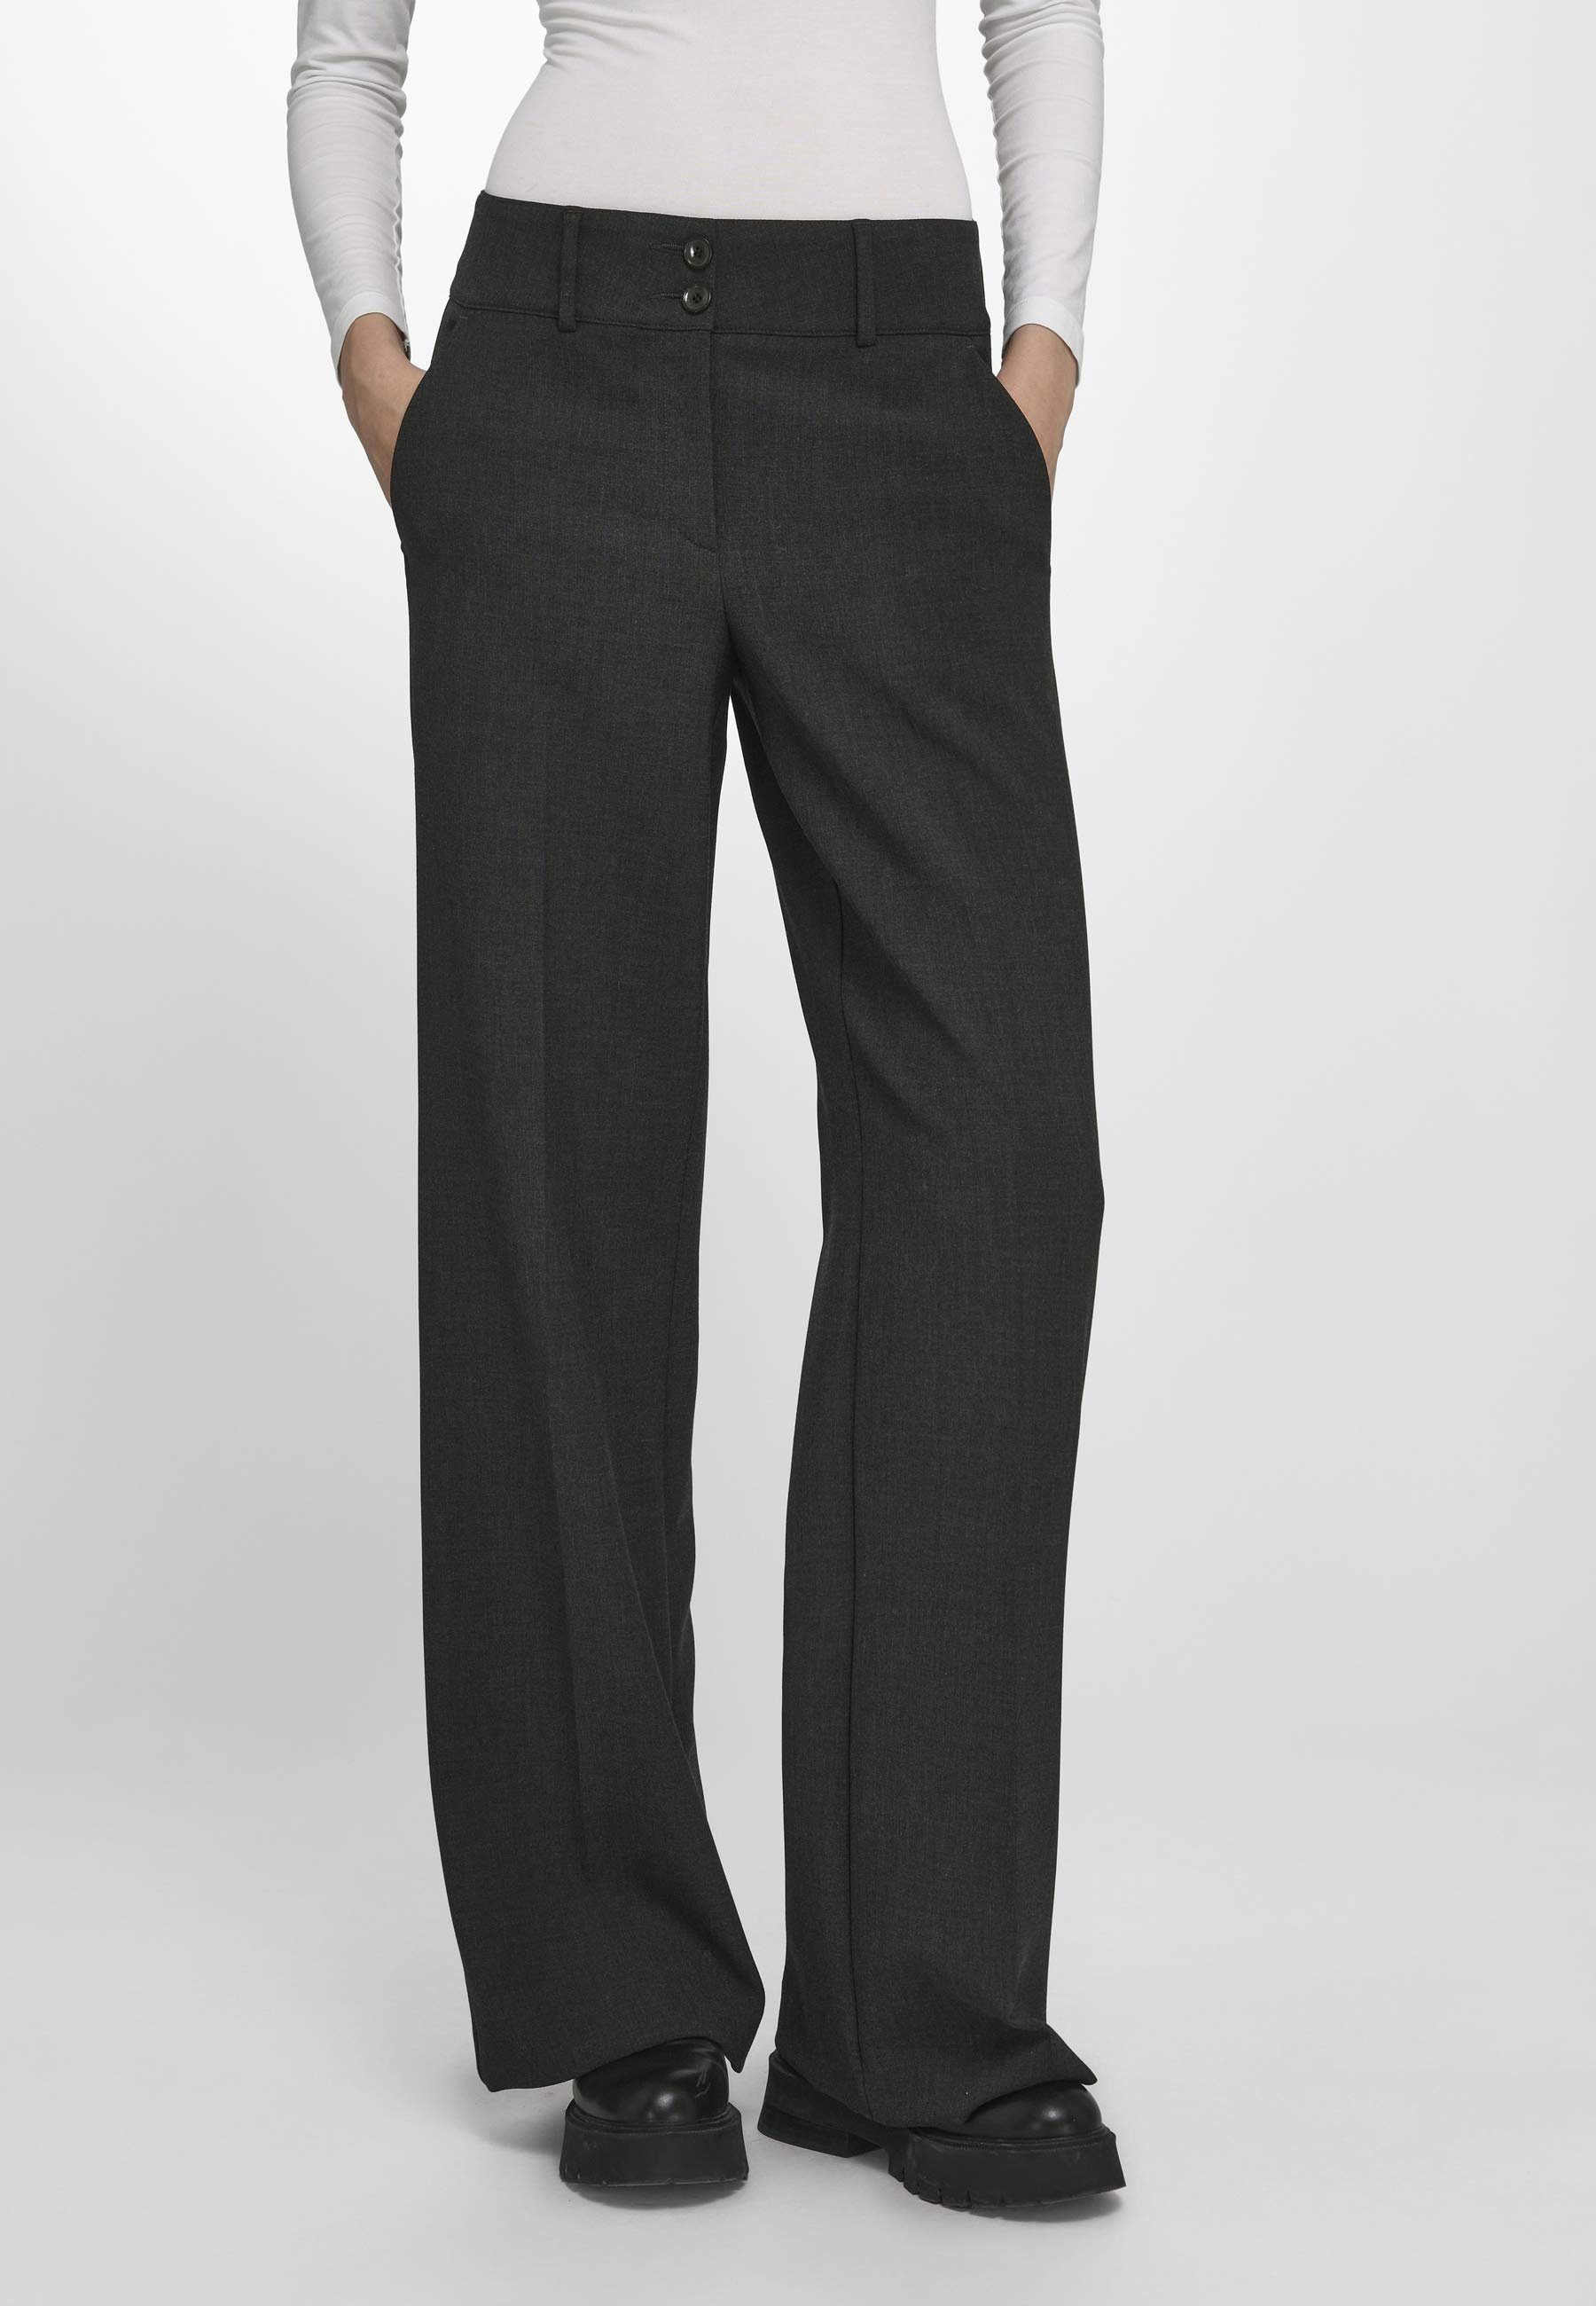 Berlin ANTHRACITE-MELANGE Fadenmeister Stoffhose Trousers